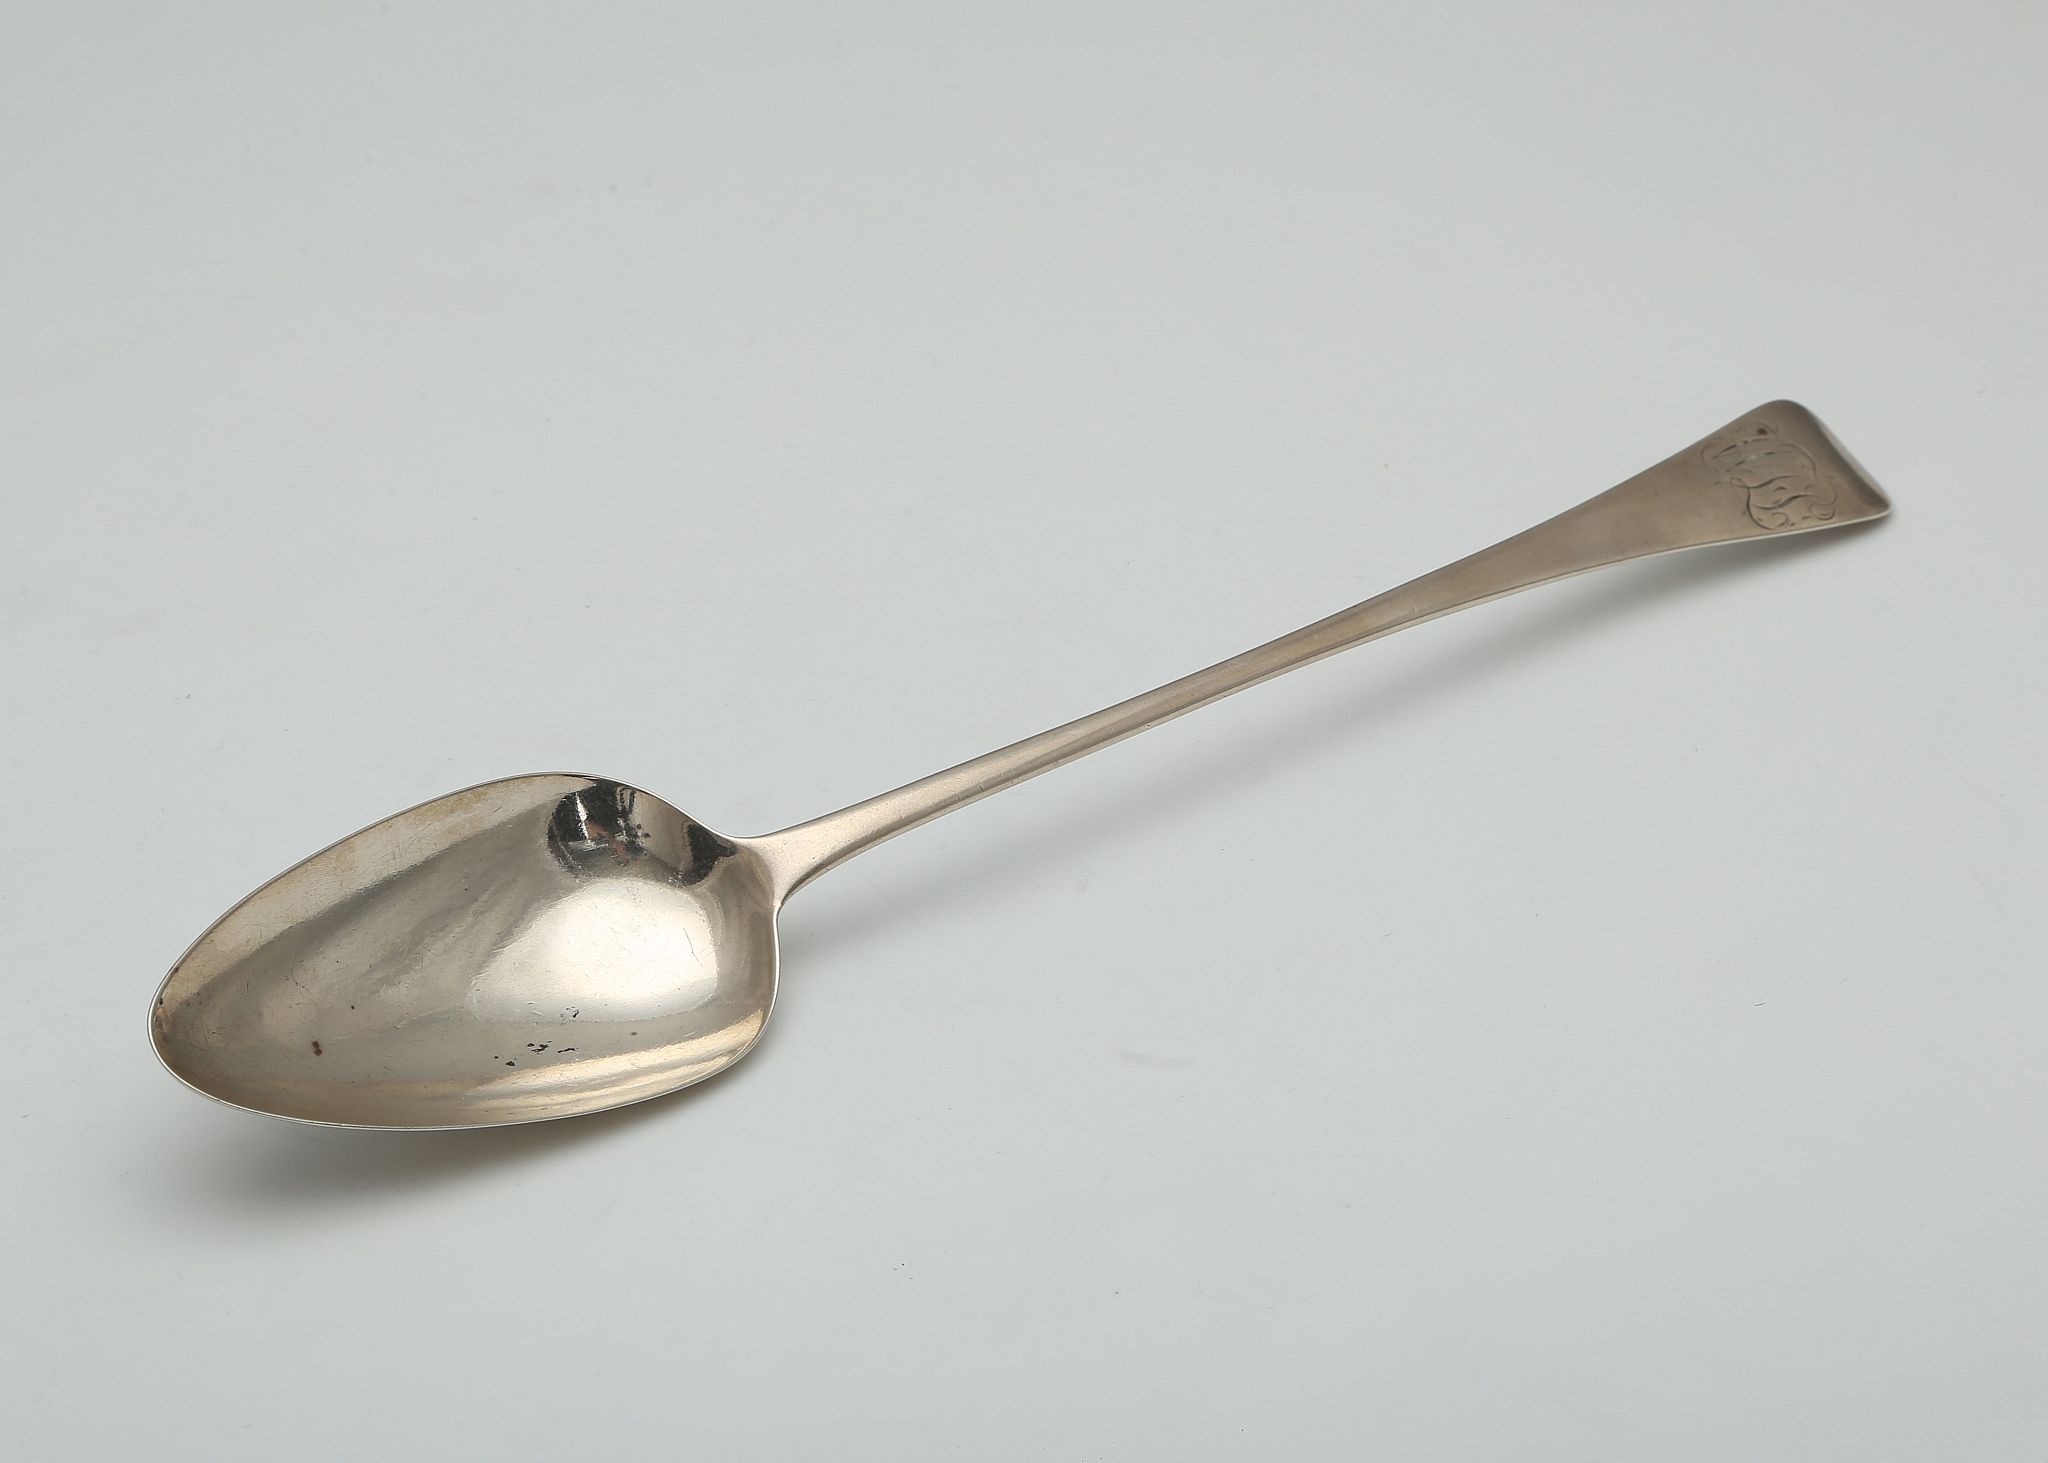 Antique George III Sterling Silver basting spoon by John Lias, London 1807. In Old English